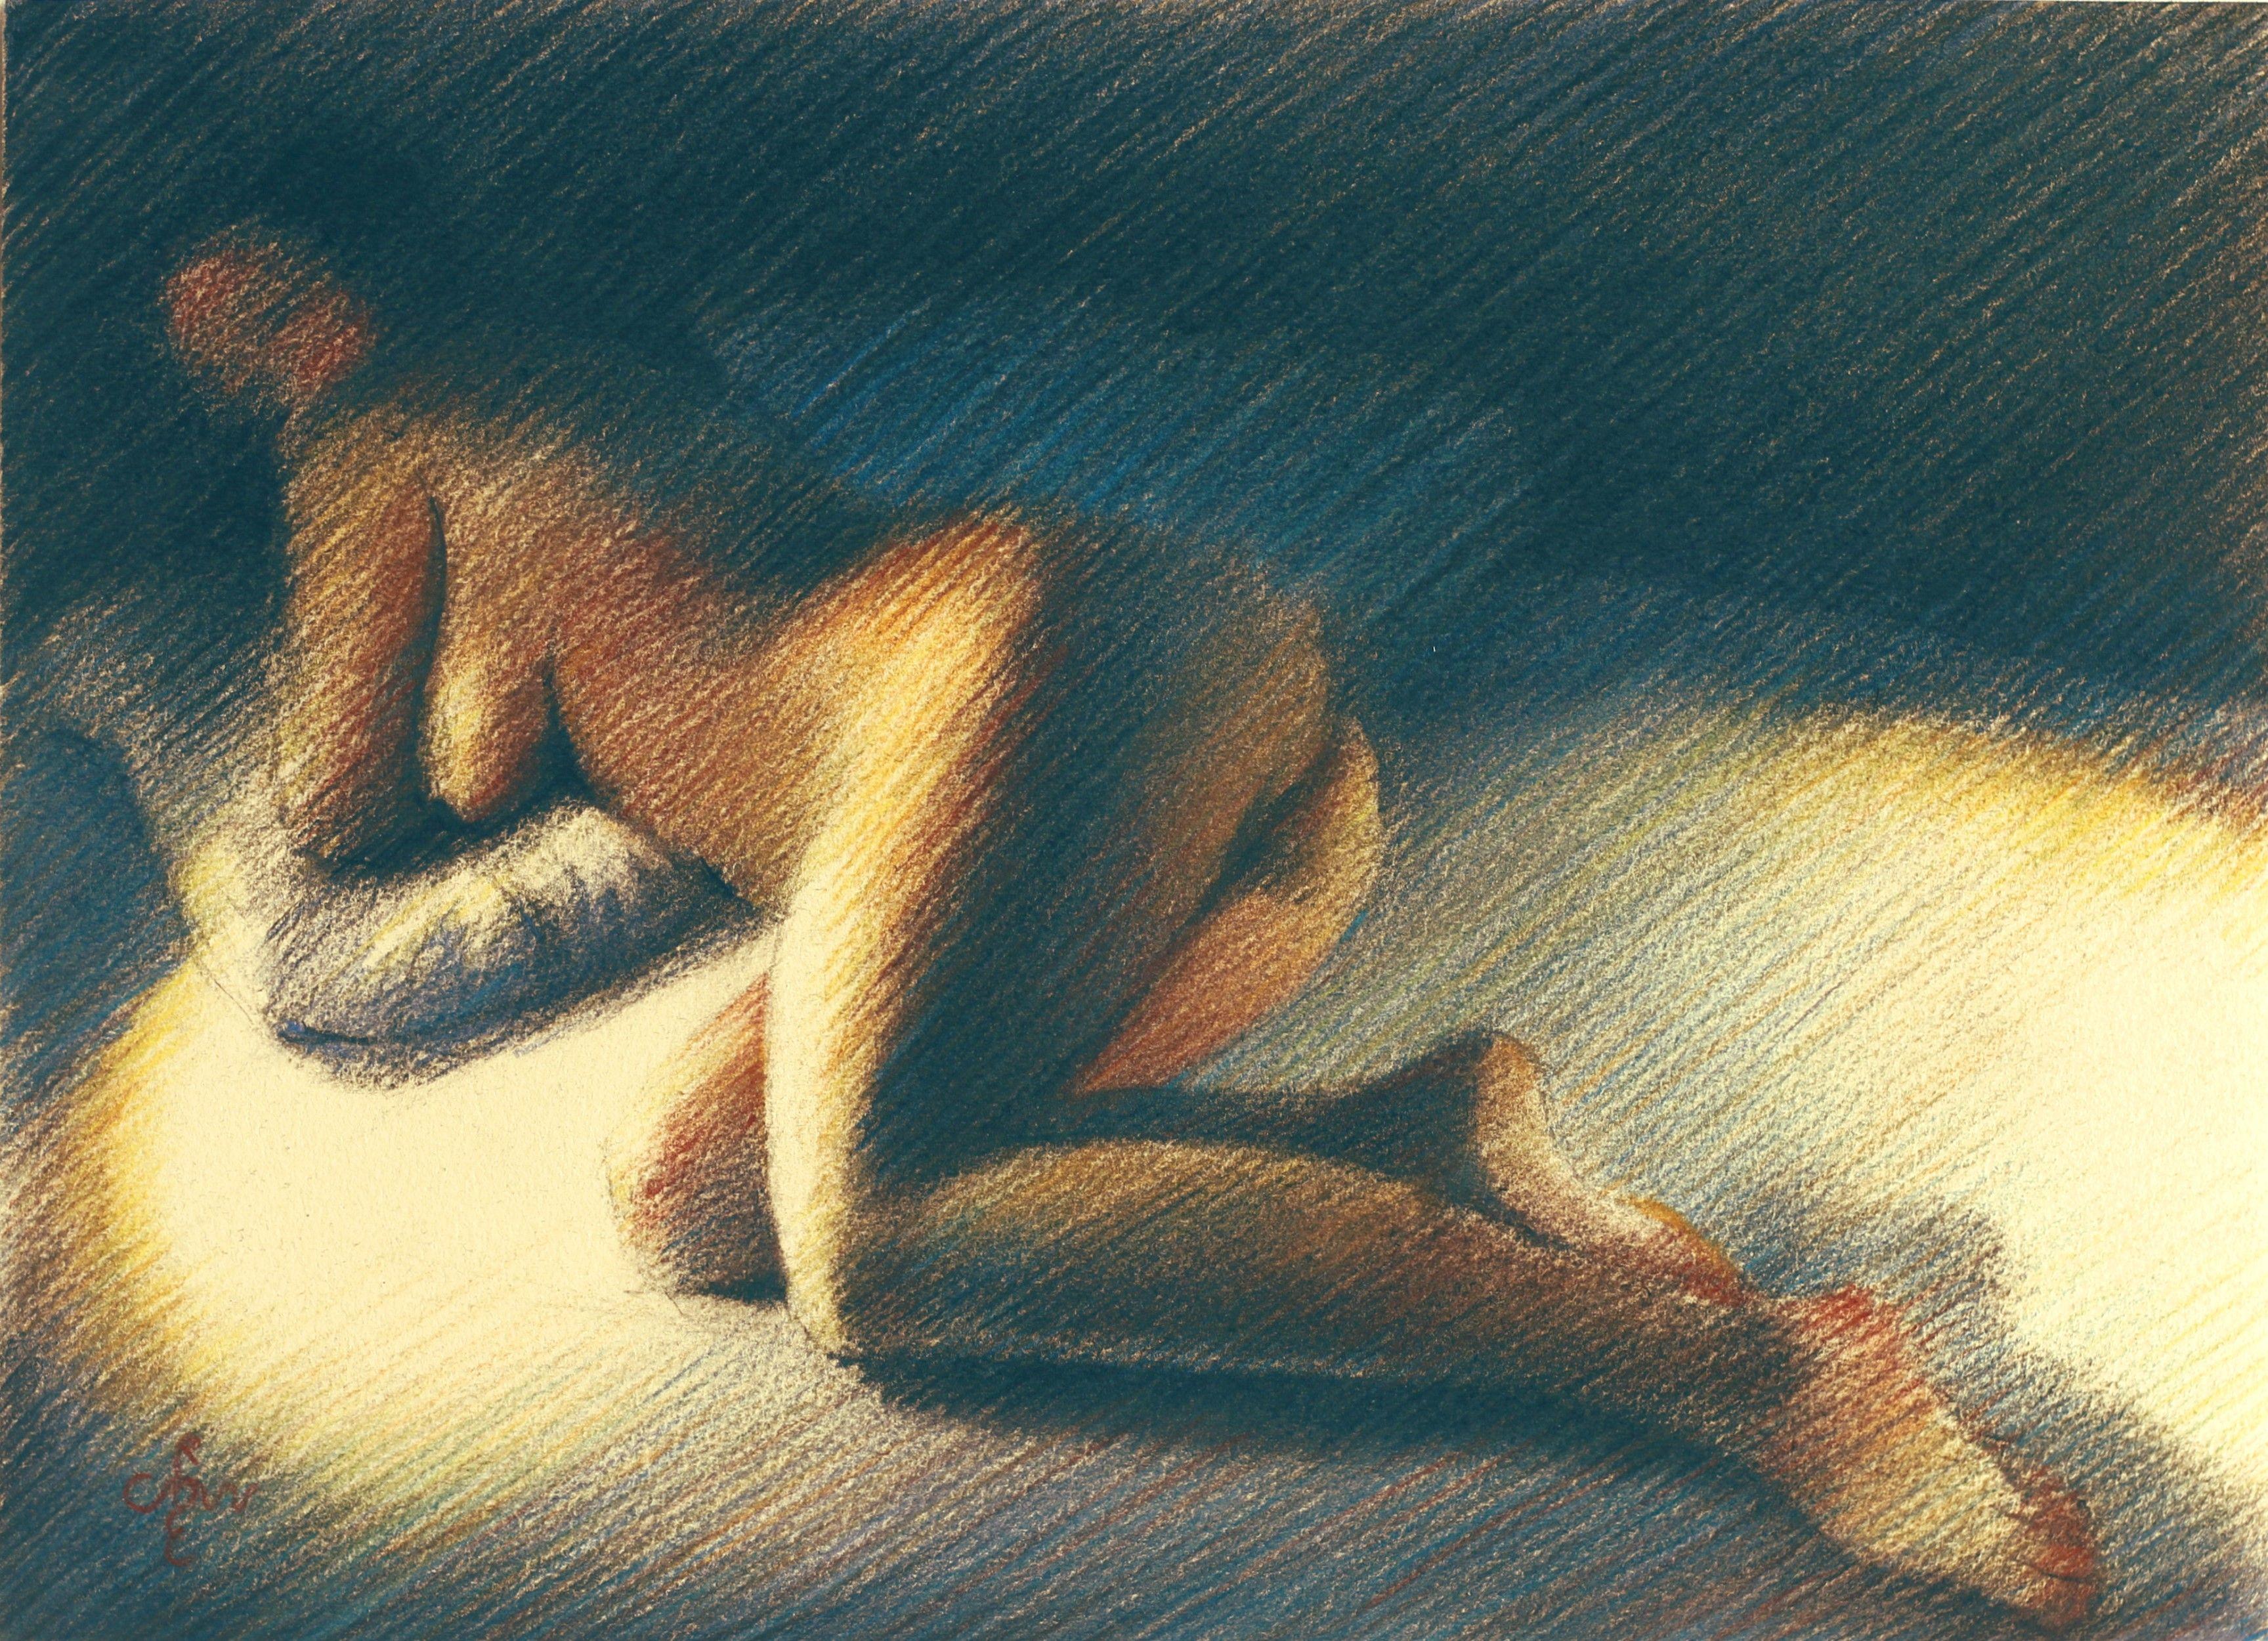 Model session - 31-12-19, Drawing, Pastels on Paper - Art by Corne Akkers